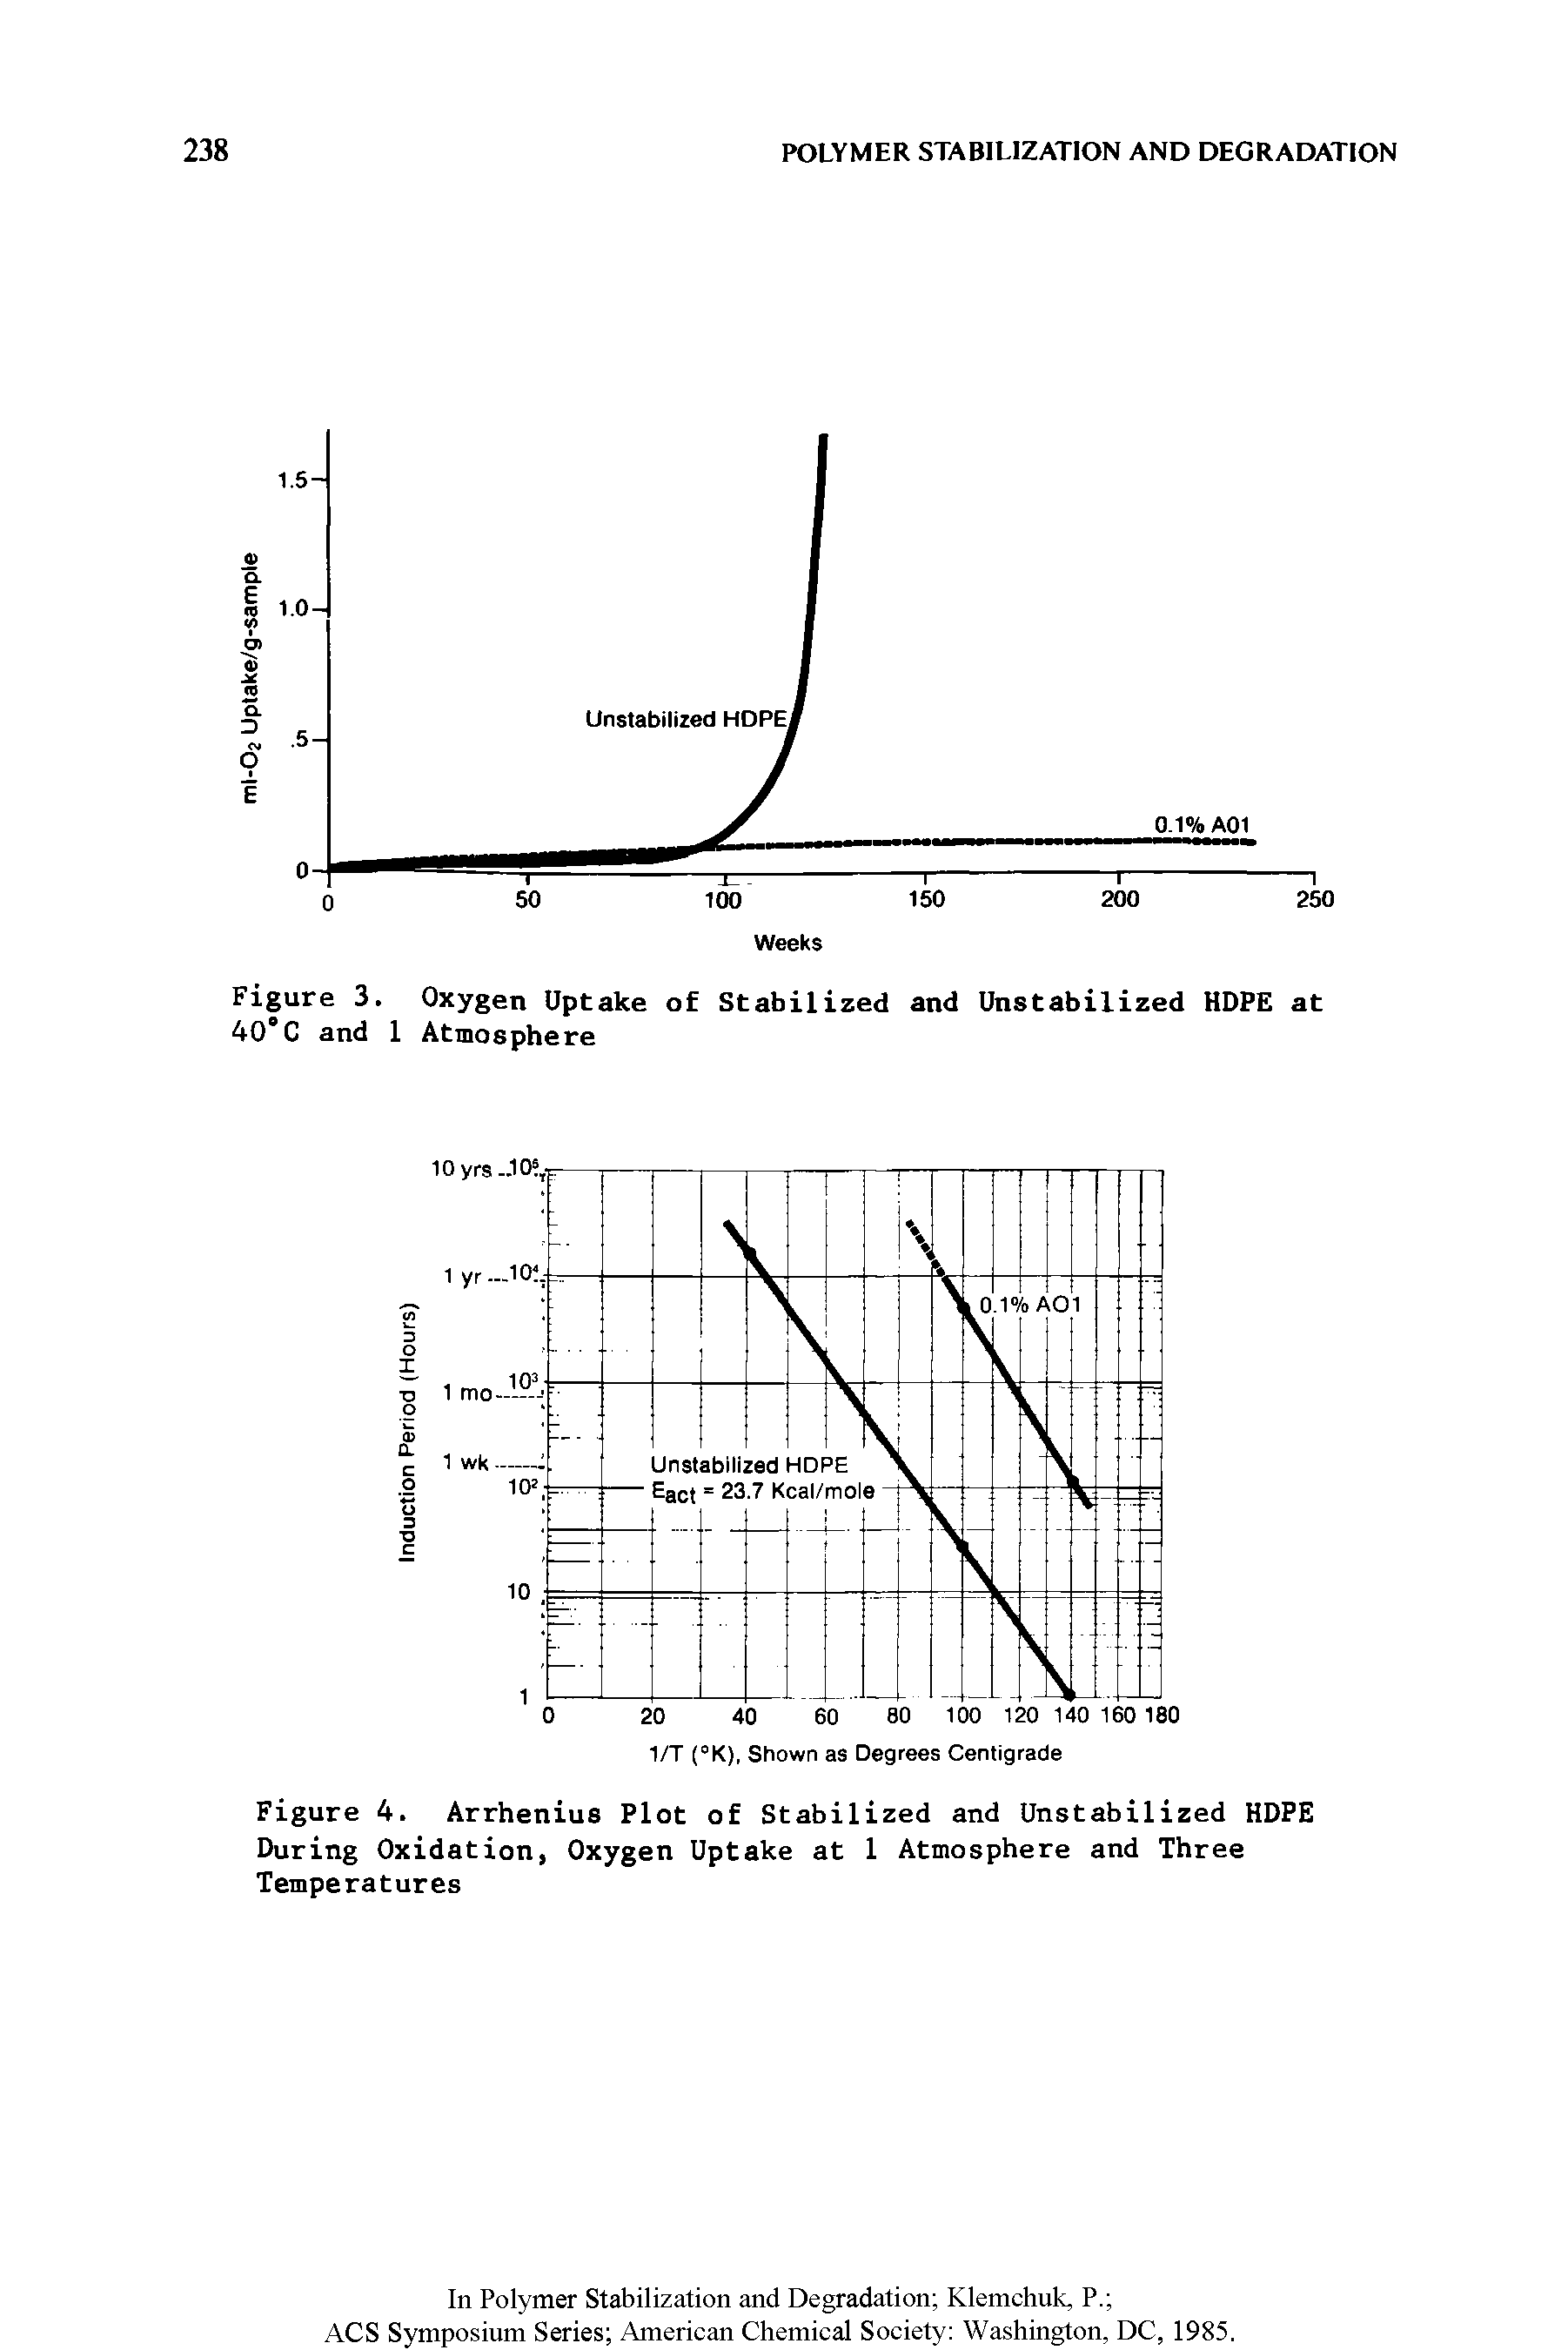 Figure 4. Arrhenius Plot of Stabilized and Unstabilized HDPE During Oxidation, Oxygen Uptake at 1 Atmosphere and Three Temperatures...